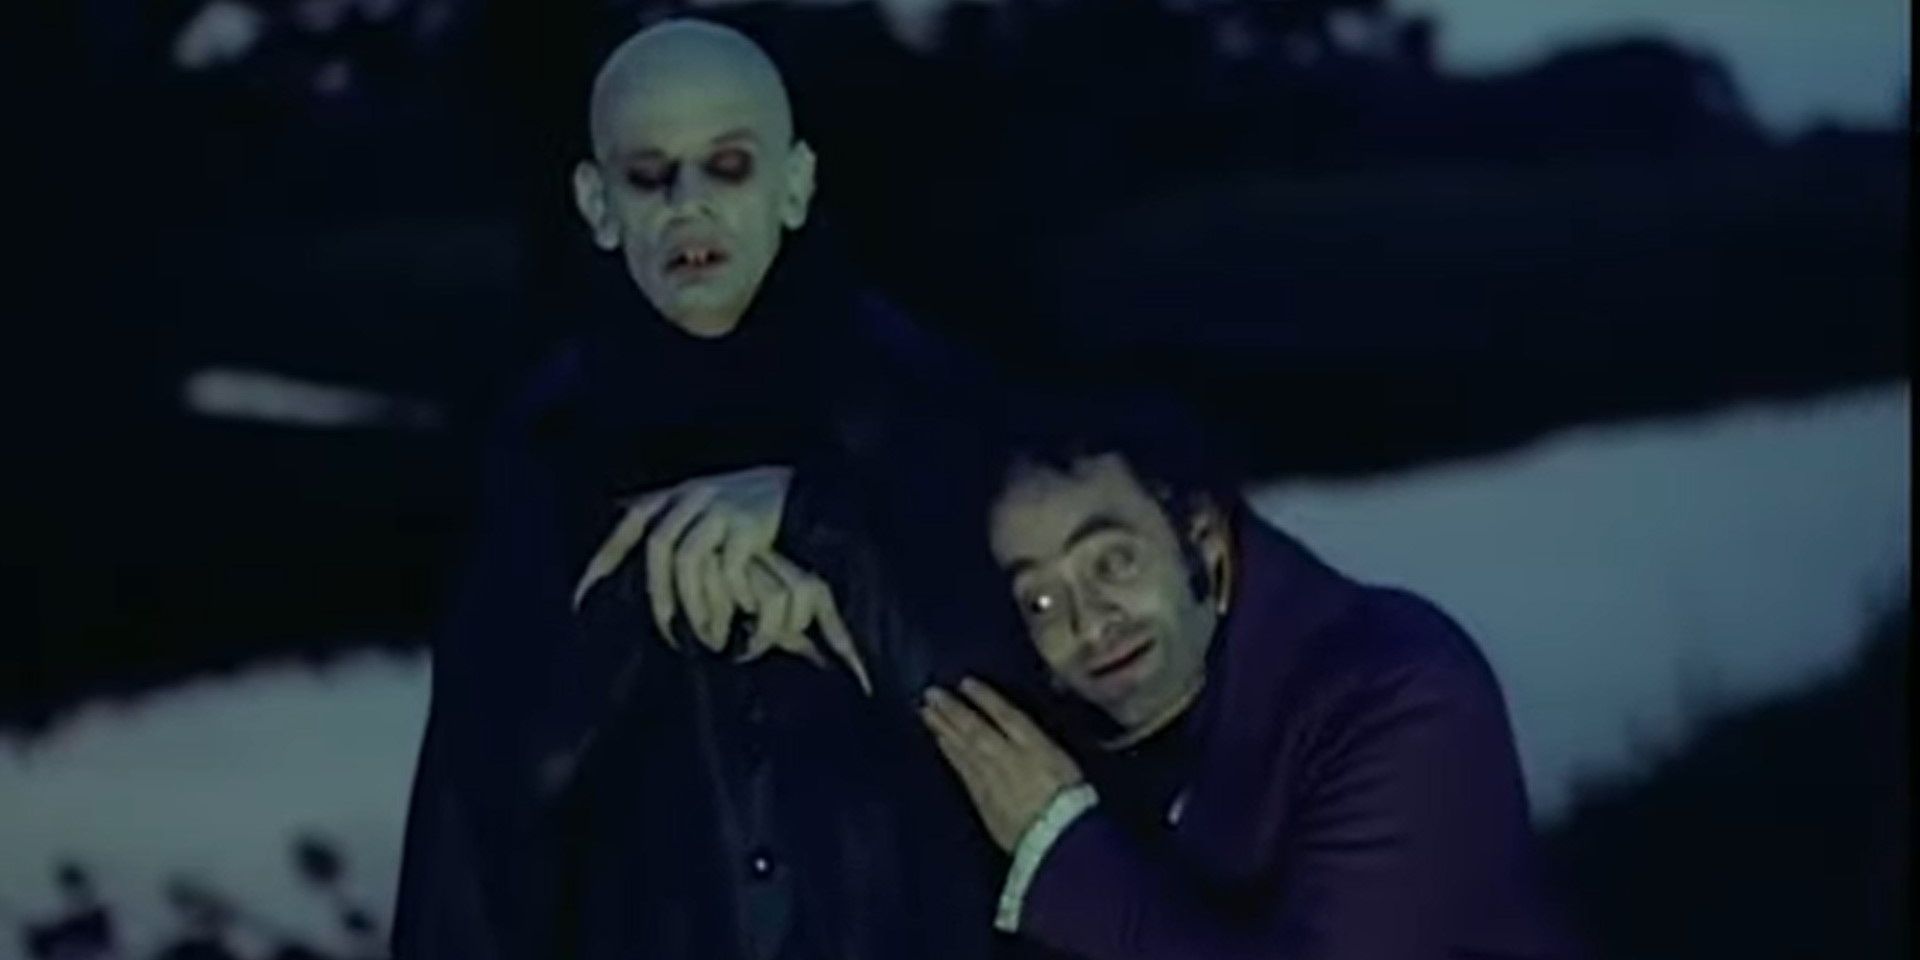 Renfield (played by Roland Topor) clutching the cloak of Nosferatu (played by Klaus Kinski) in Nosferatu the Vampyre (1979)